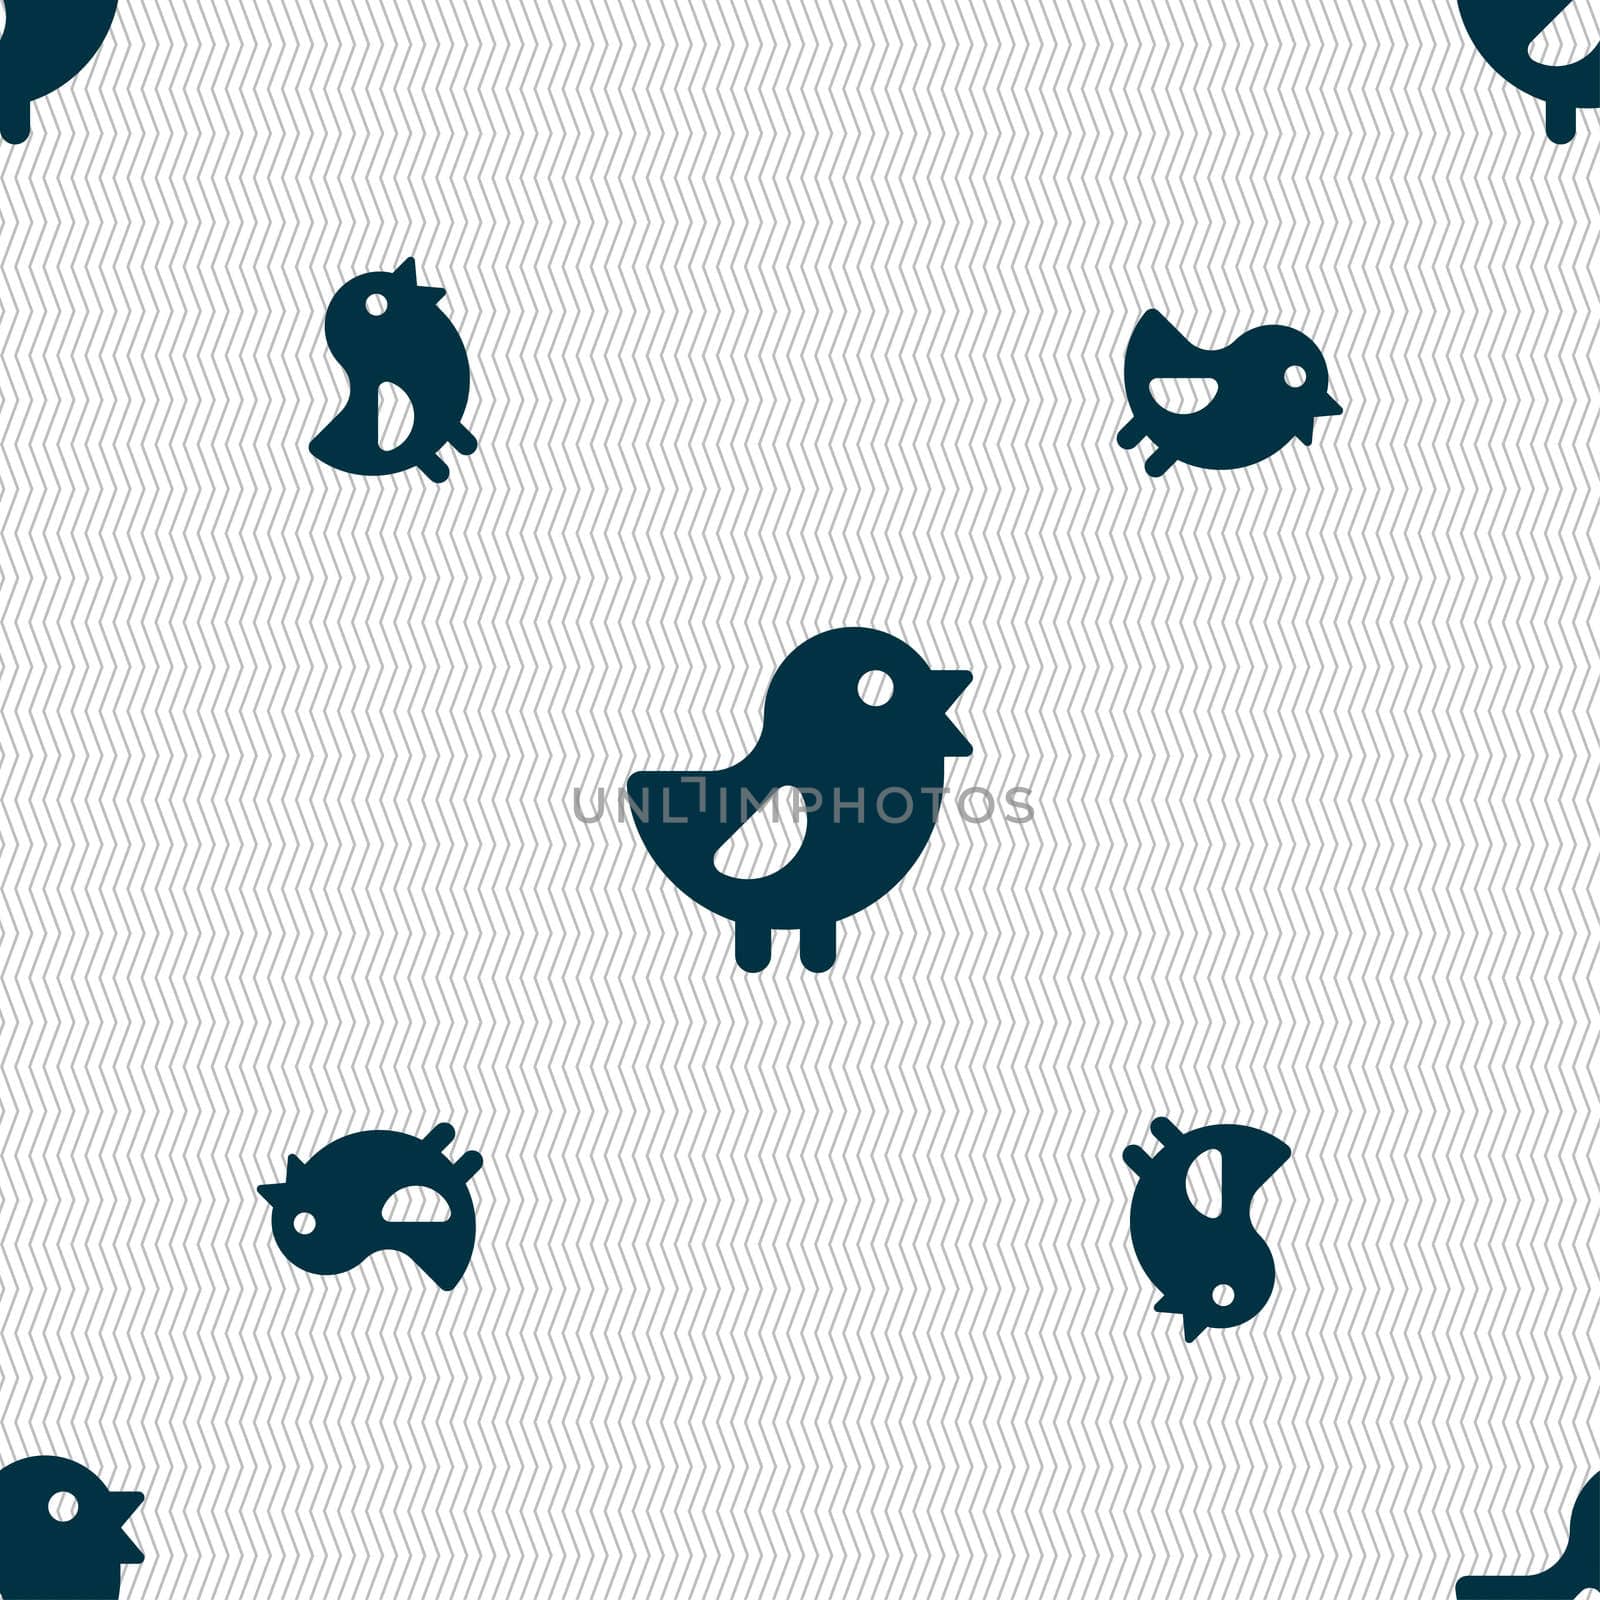 chicken, Bird icon sign. Seamless pattern with geometric texture.  by serhii_lohvyniuk